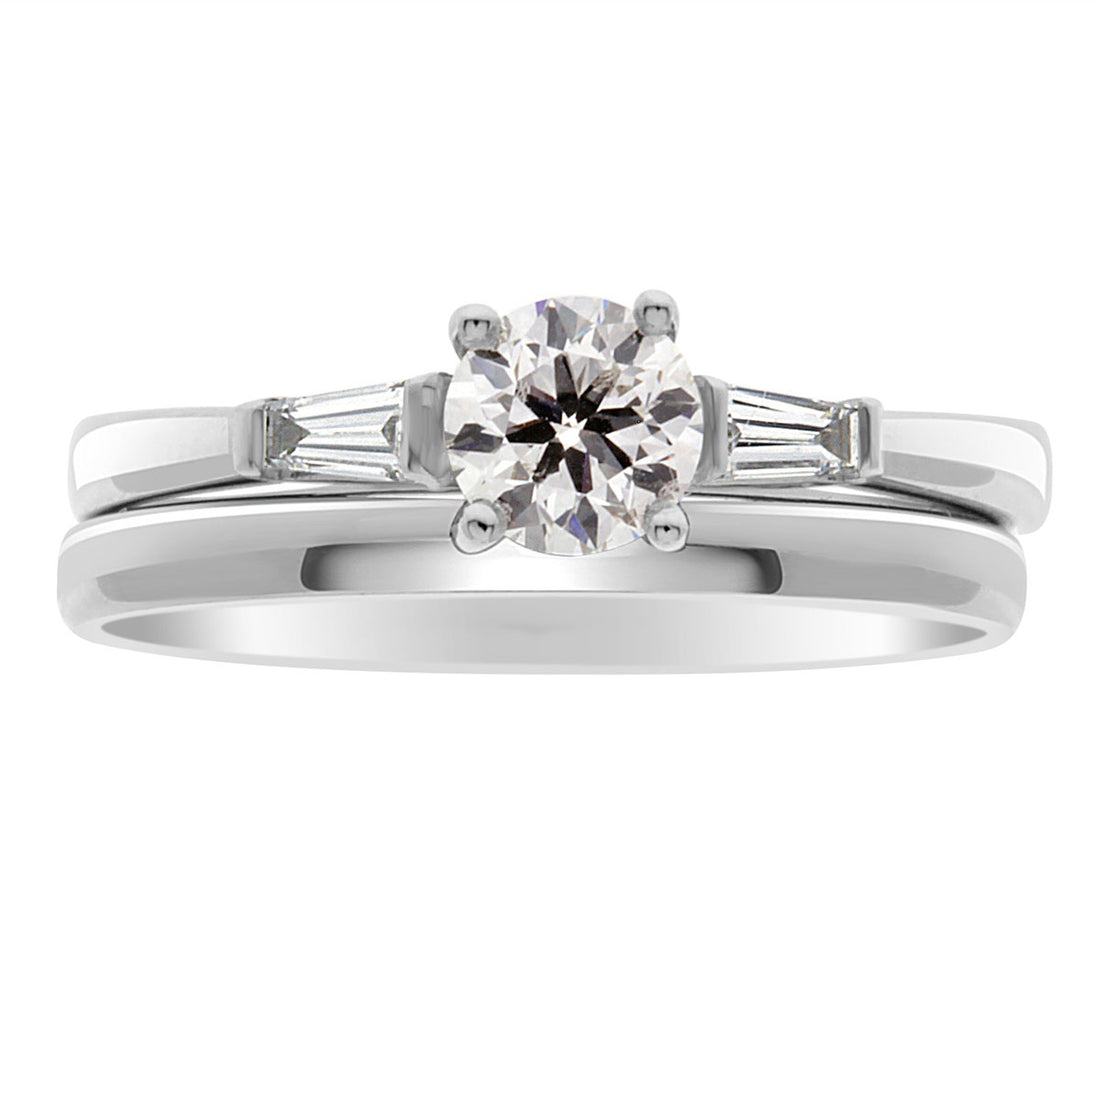 Round Solitaire With Tapered Baguettes made from white with a plain wedding ring